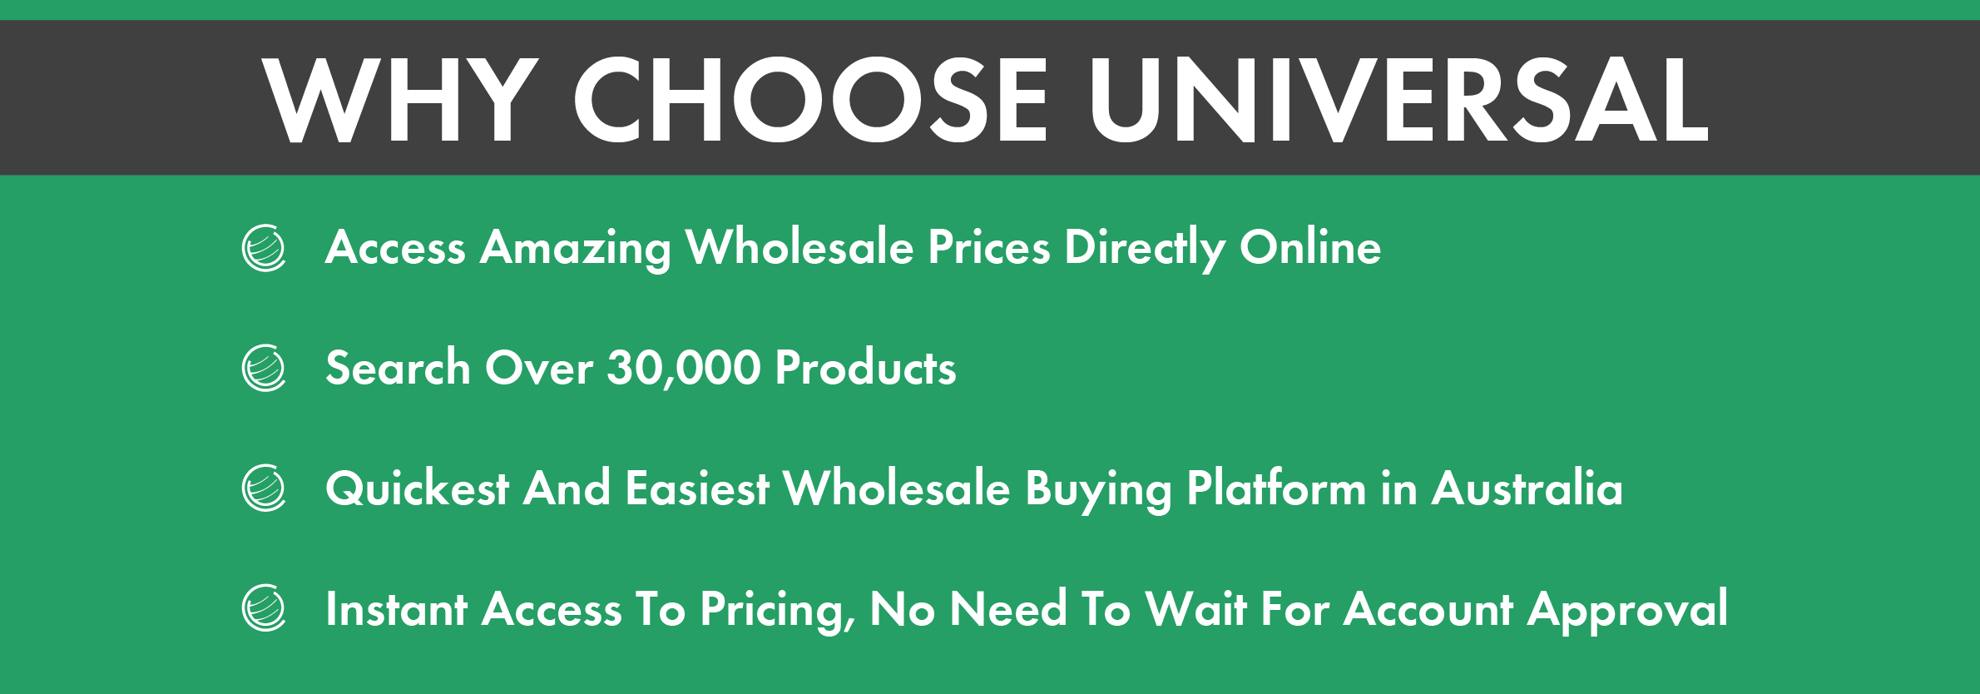 Why choose Universal